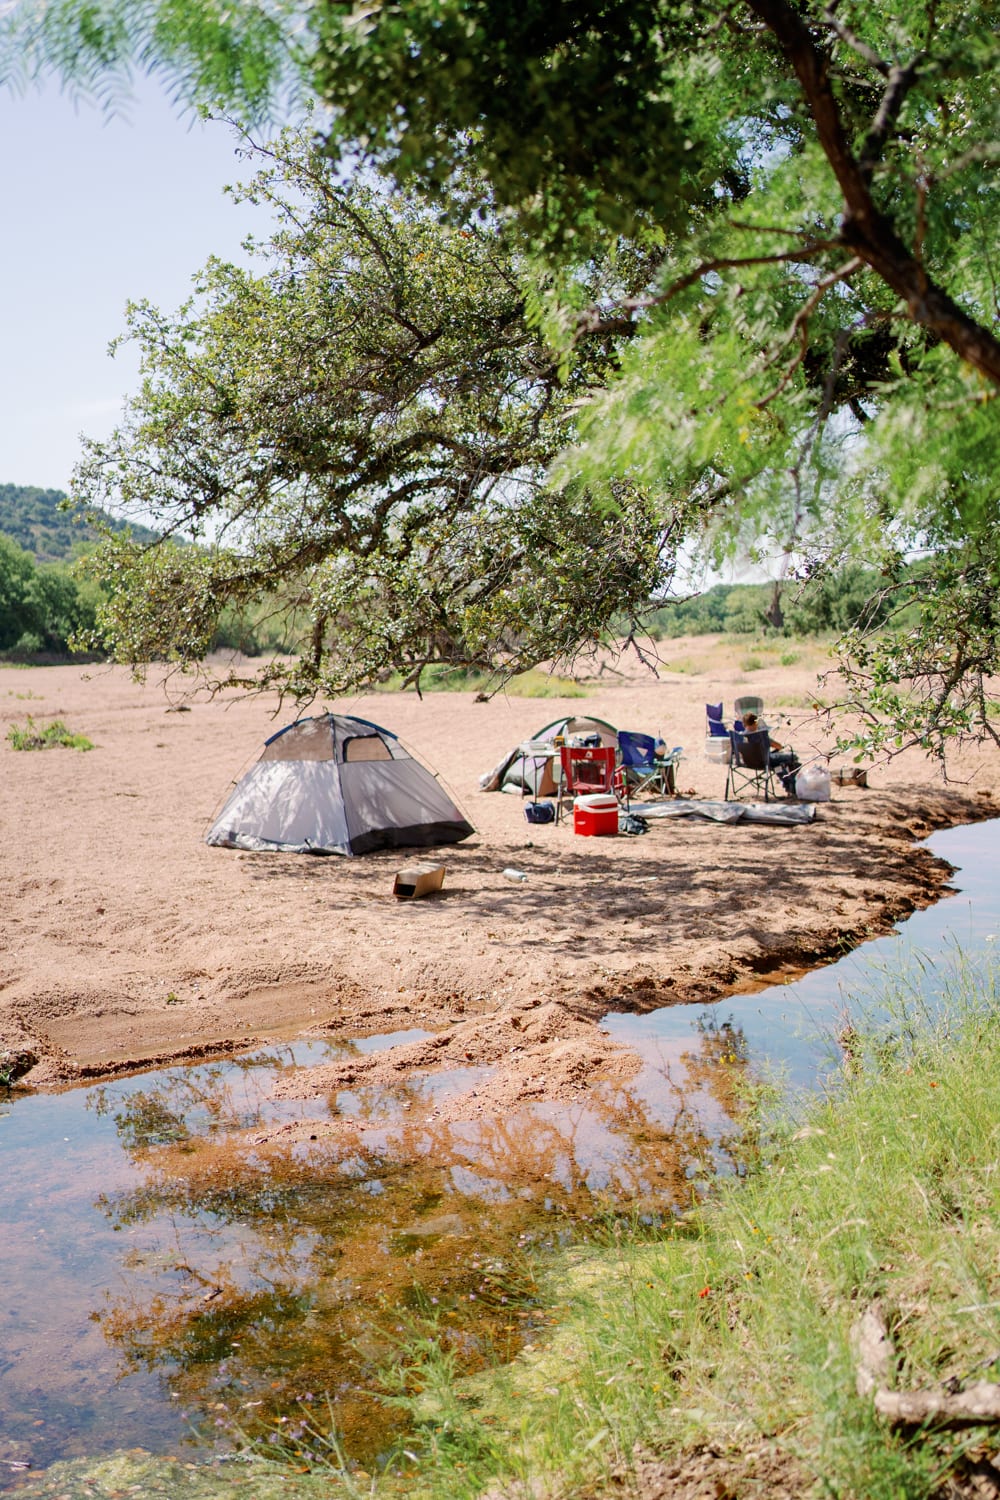 A campsite on the dry creek